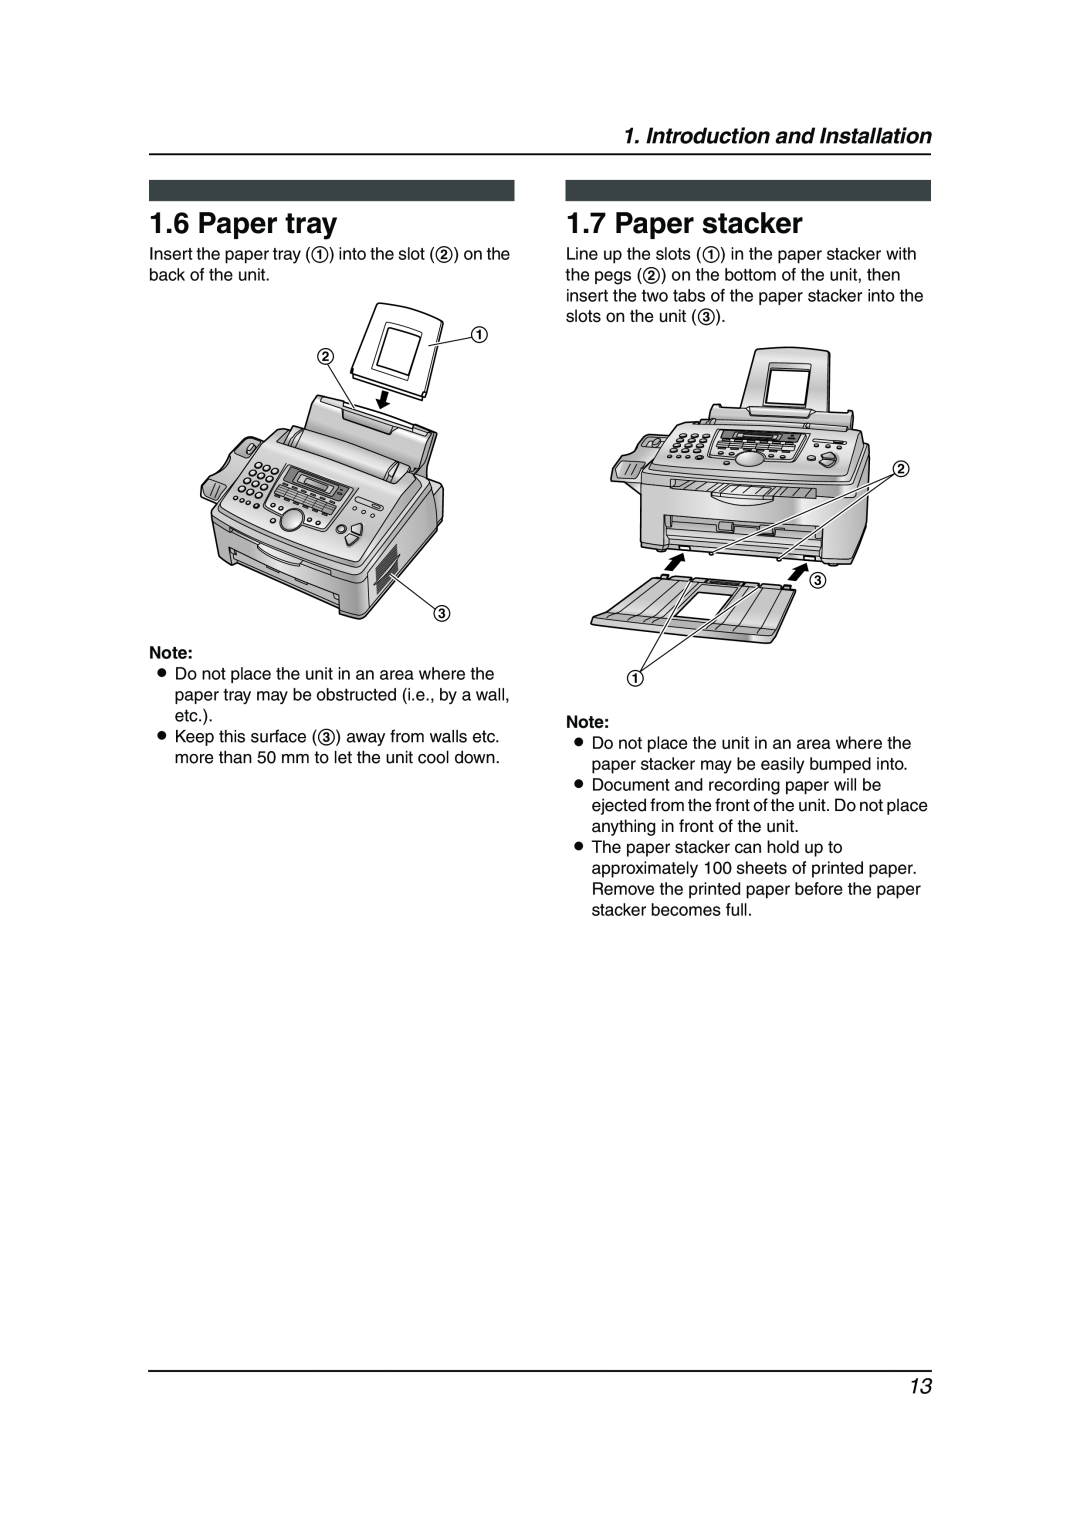 Panasonic KX-FL511AL manual Paper tray, Paper stacker, Introduction and Installation 